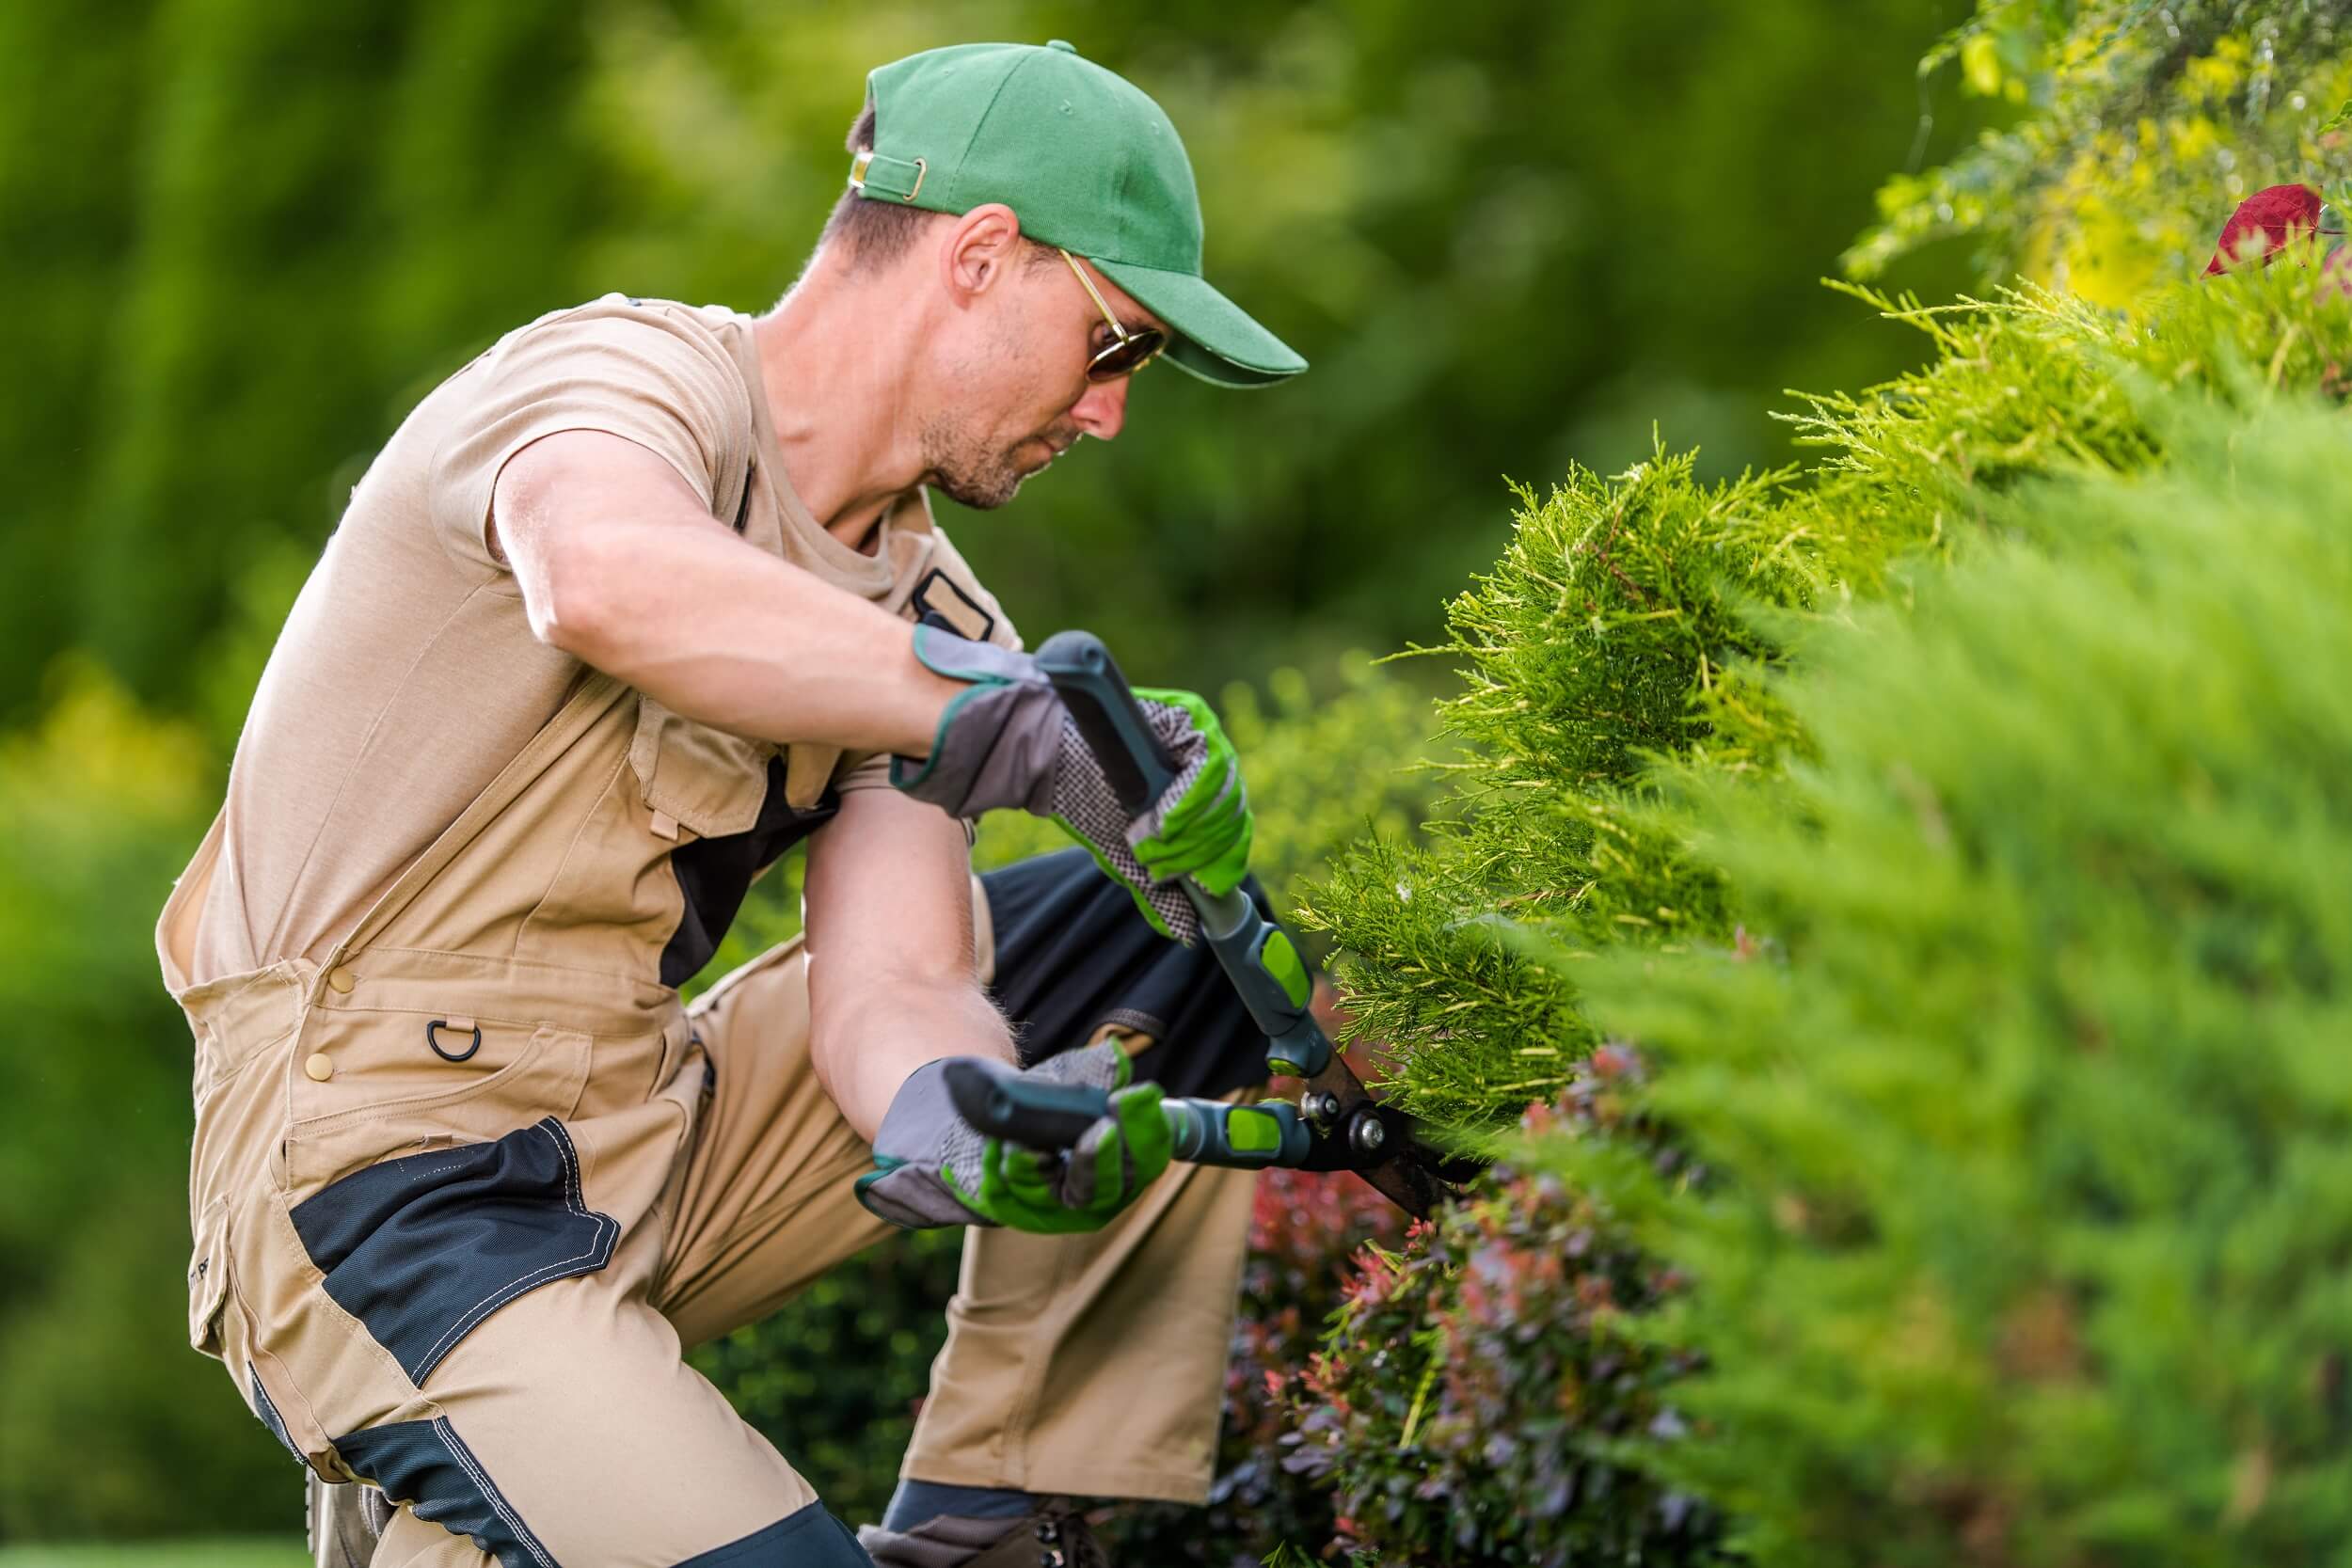 A photo of a person trimming a tree with professional equipment